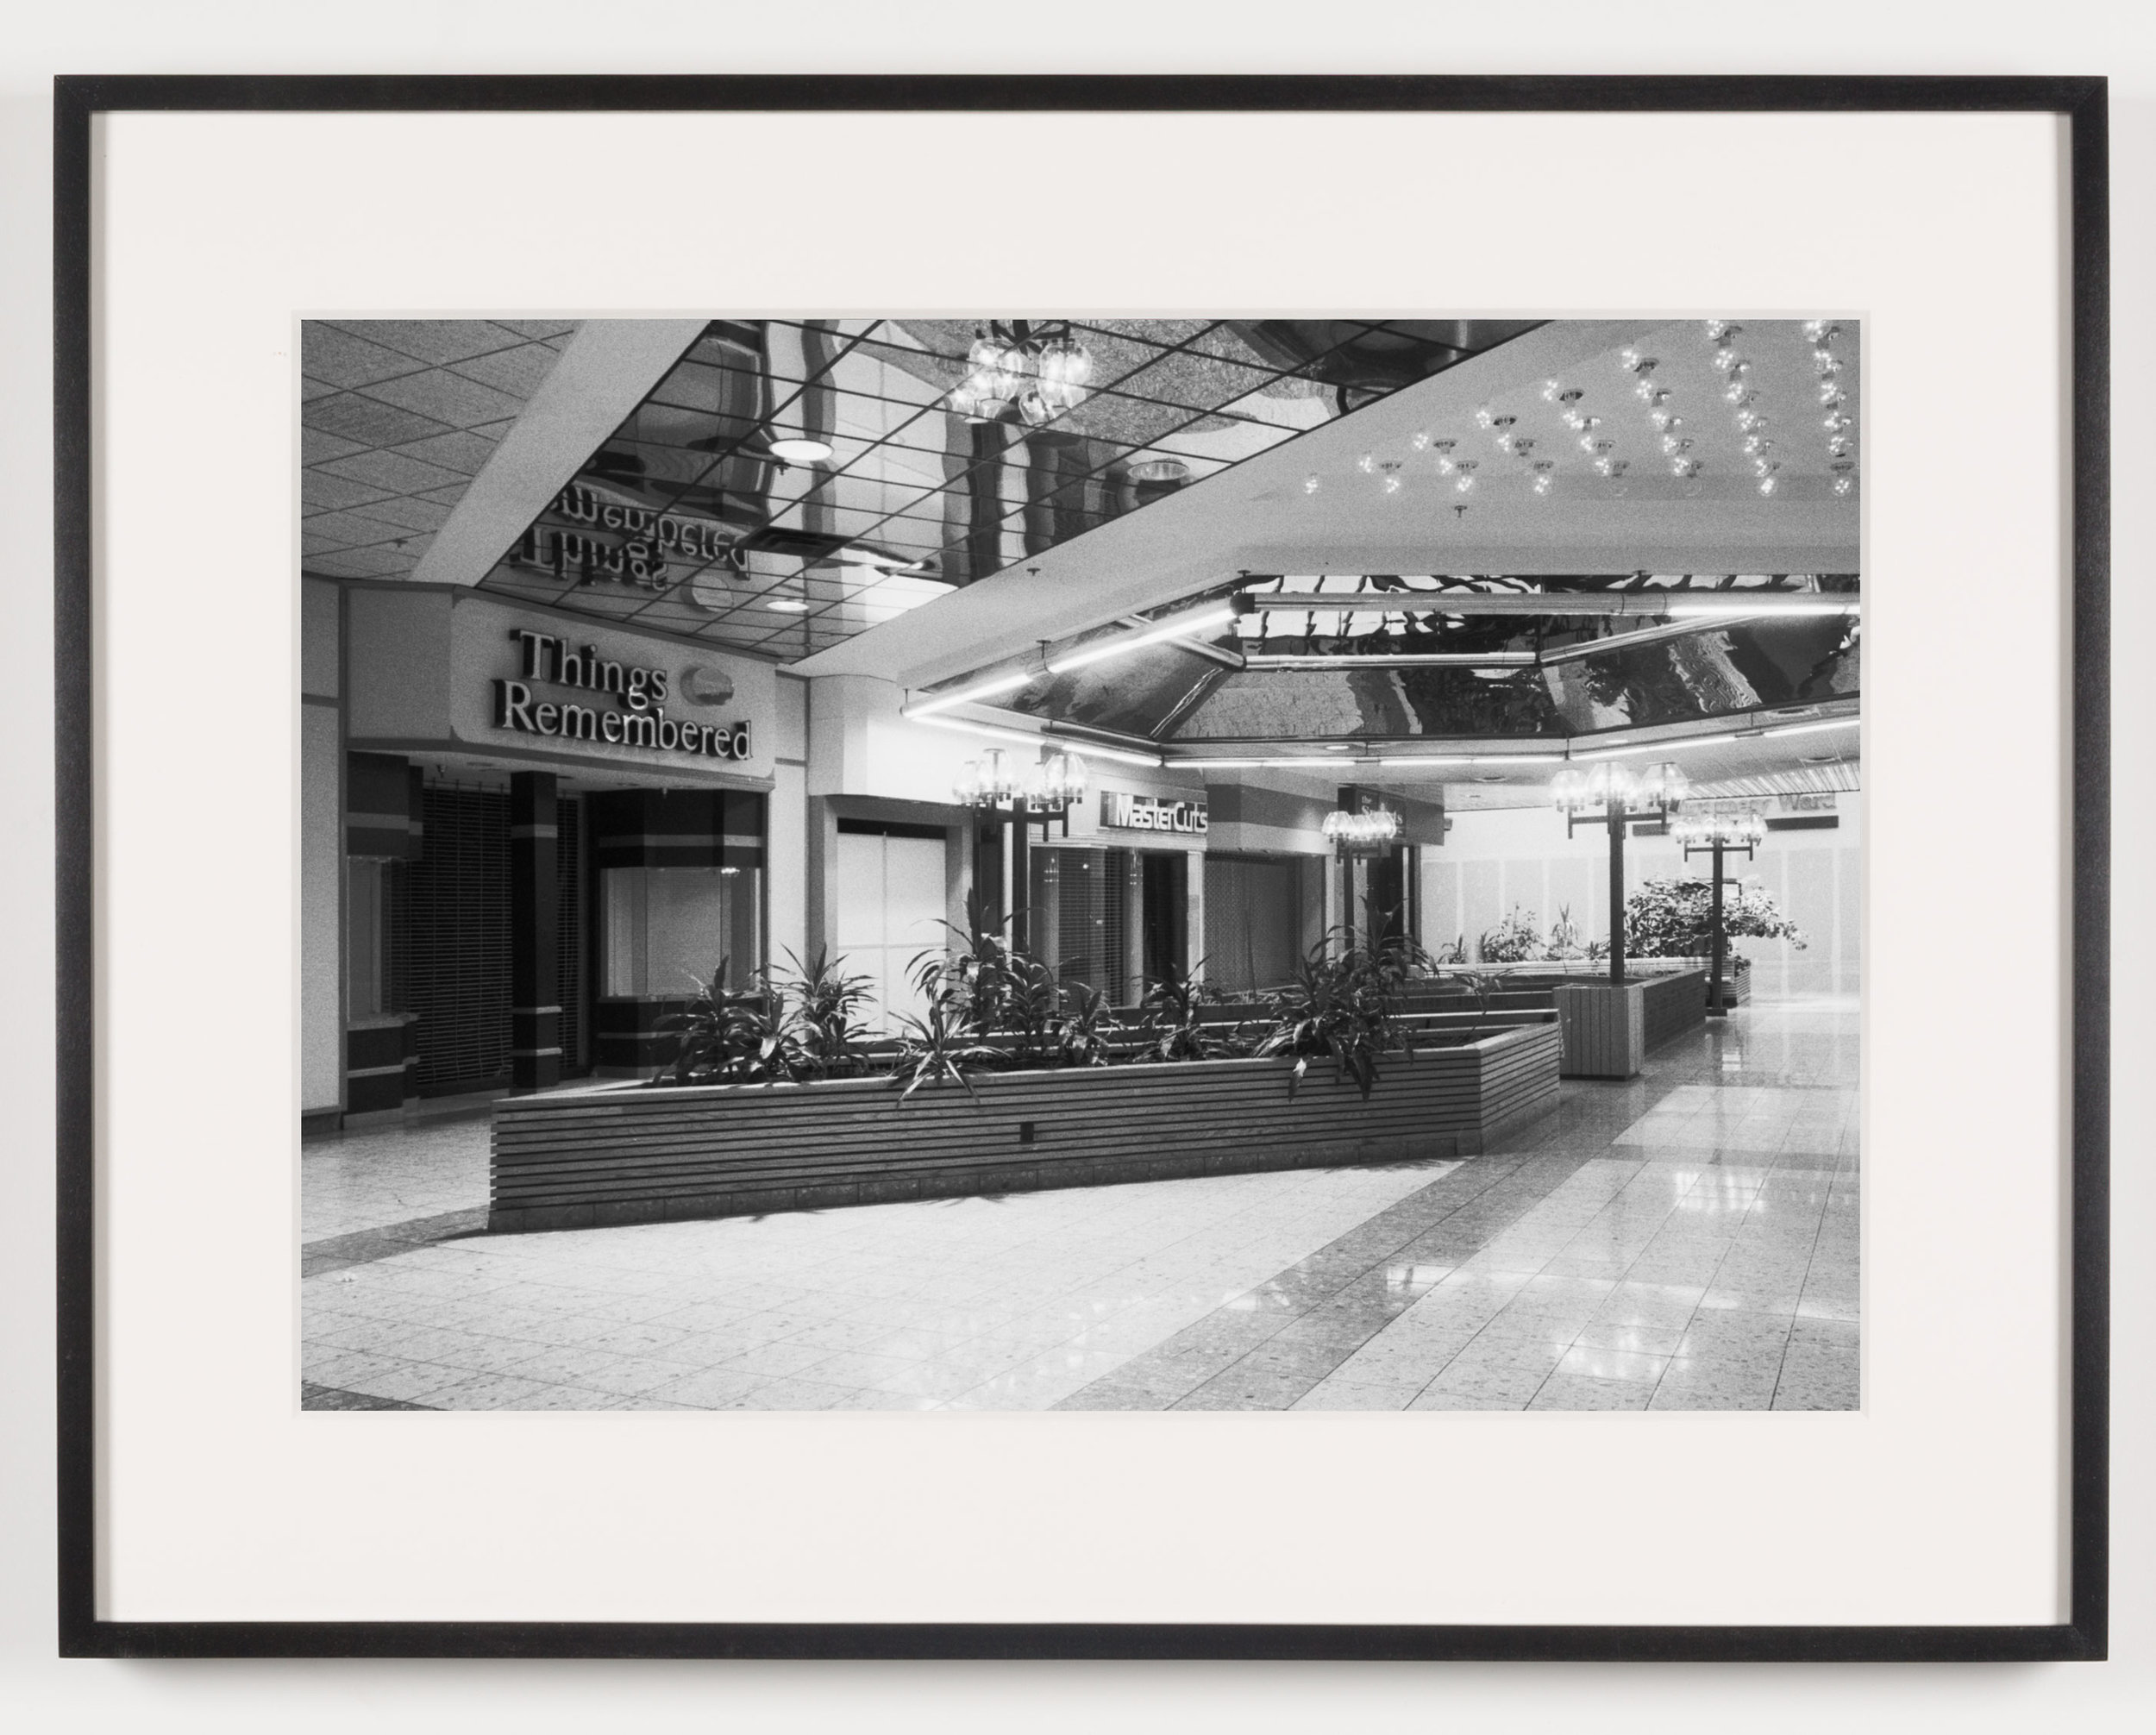   Southwyck Mall, Toledo, OH, Est 1972, Demo 2008   2011  Epson Ultrachrome K3 archival ink jet print on Hahnemühle Photo Rag paper  21 5/8 x 28 1/8 inches   American Passages, 2001–2011    A Diagram of Forces, 2011     